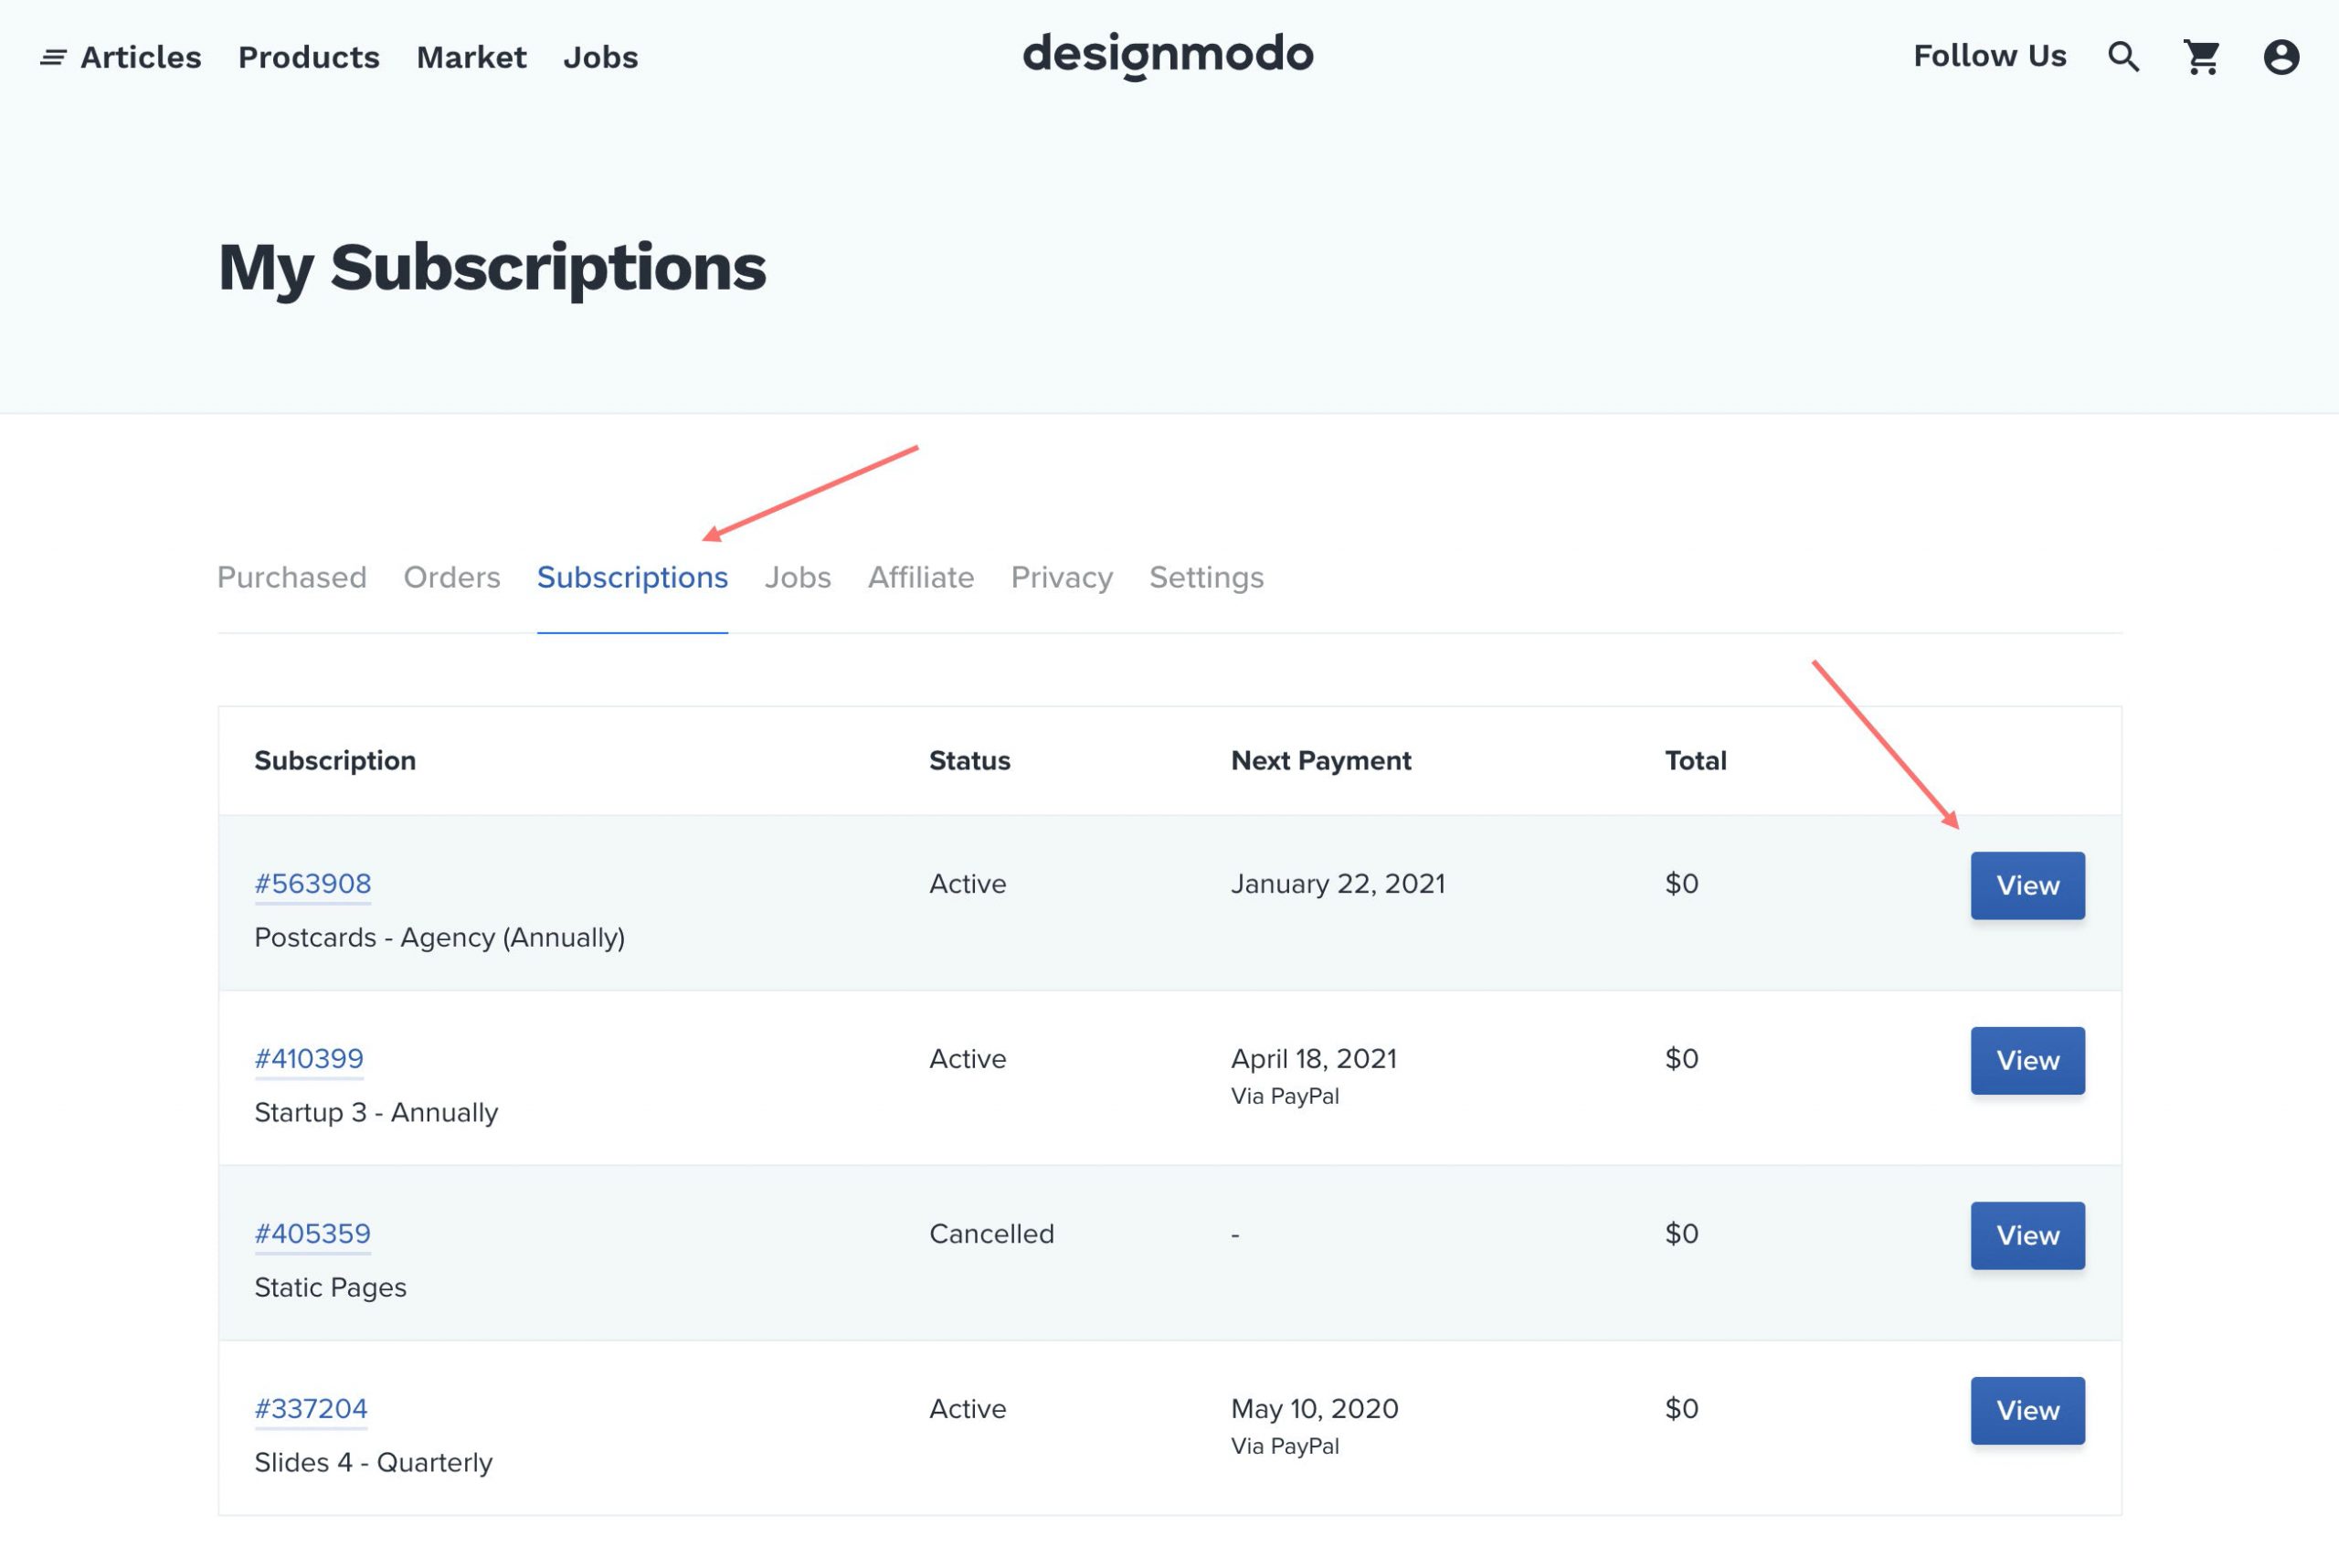 How to Upgrade, Downgrade or Switch Subscription on Designmodo